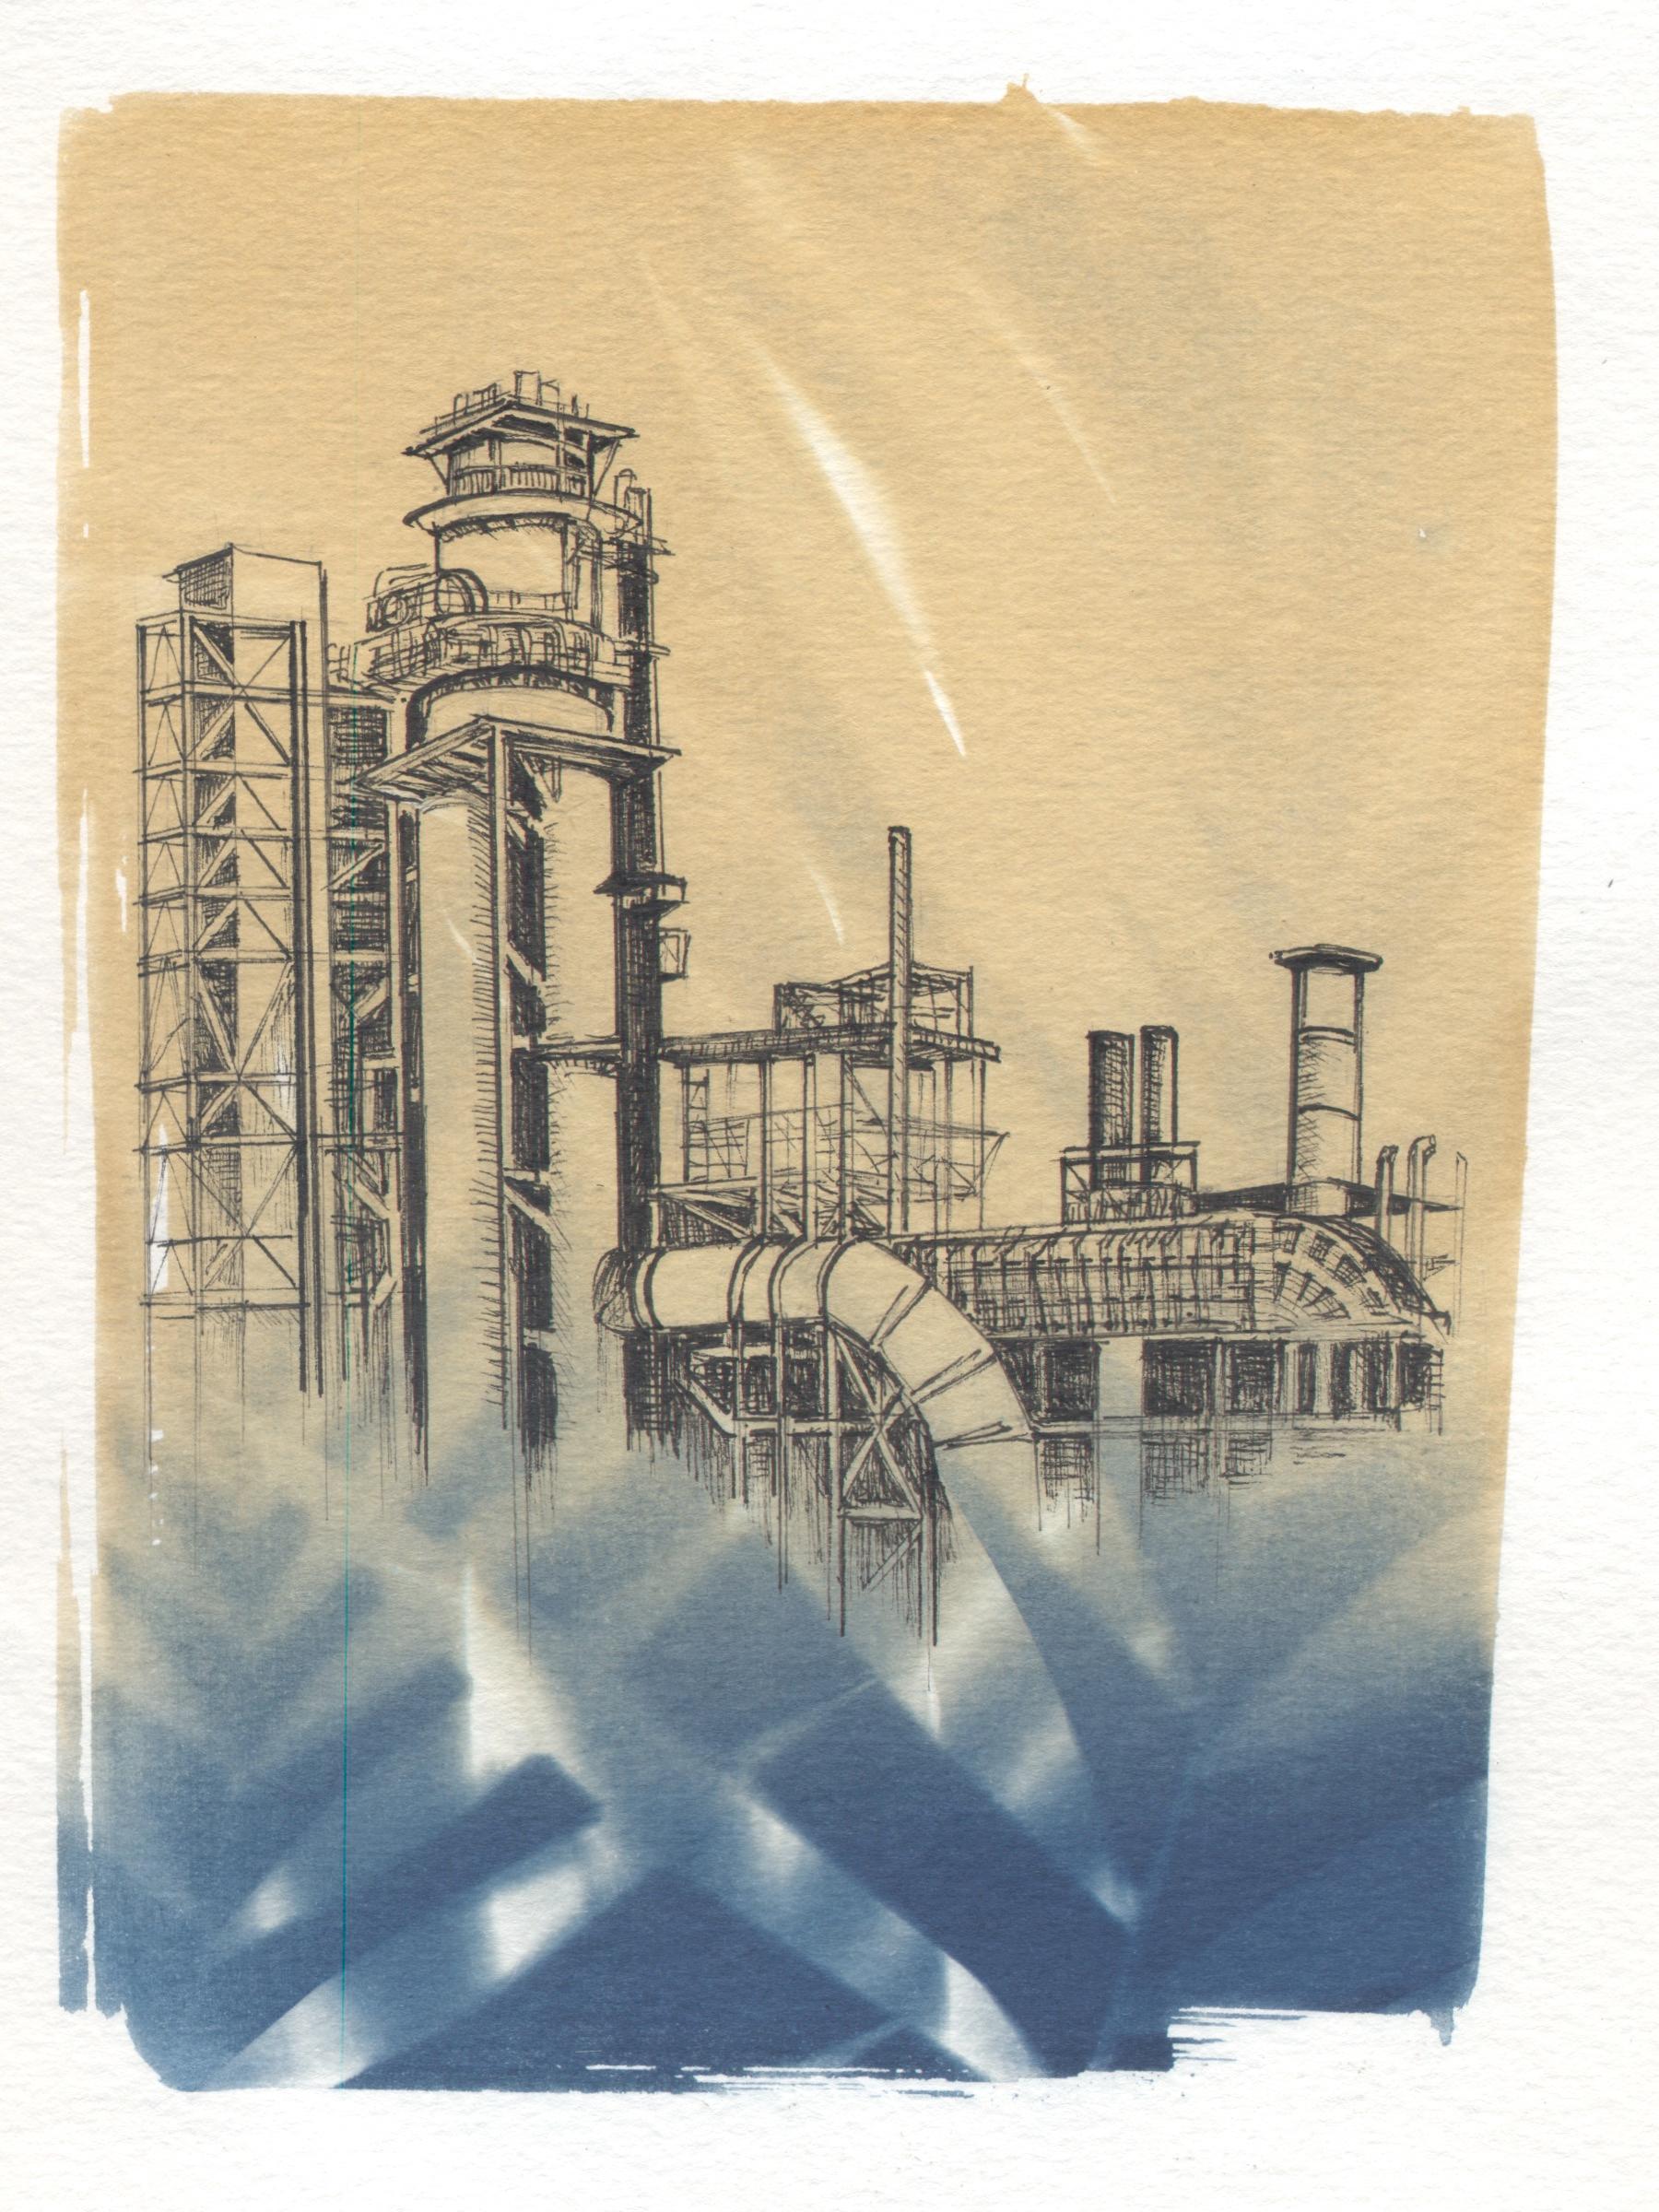 "Entanglement 12", contemporary, oil refinery, pen, ink, cyanotype, photograph